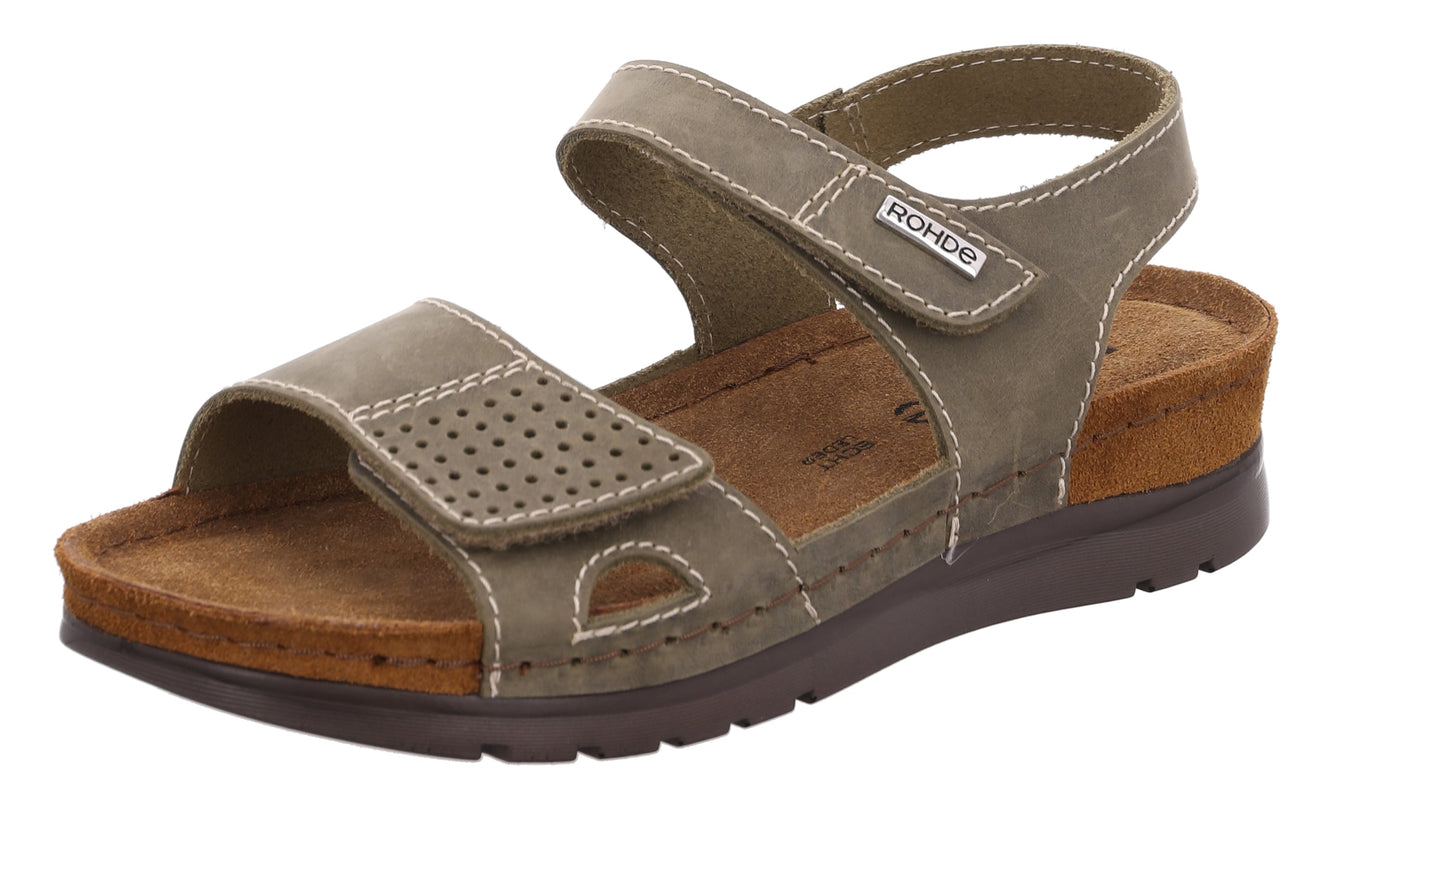 Rohde 6159 61 Cattolica Olive Green Velcro Sandals